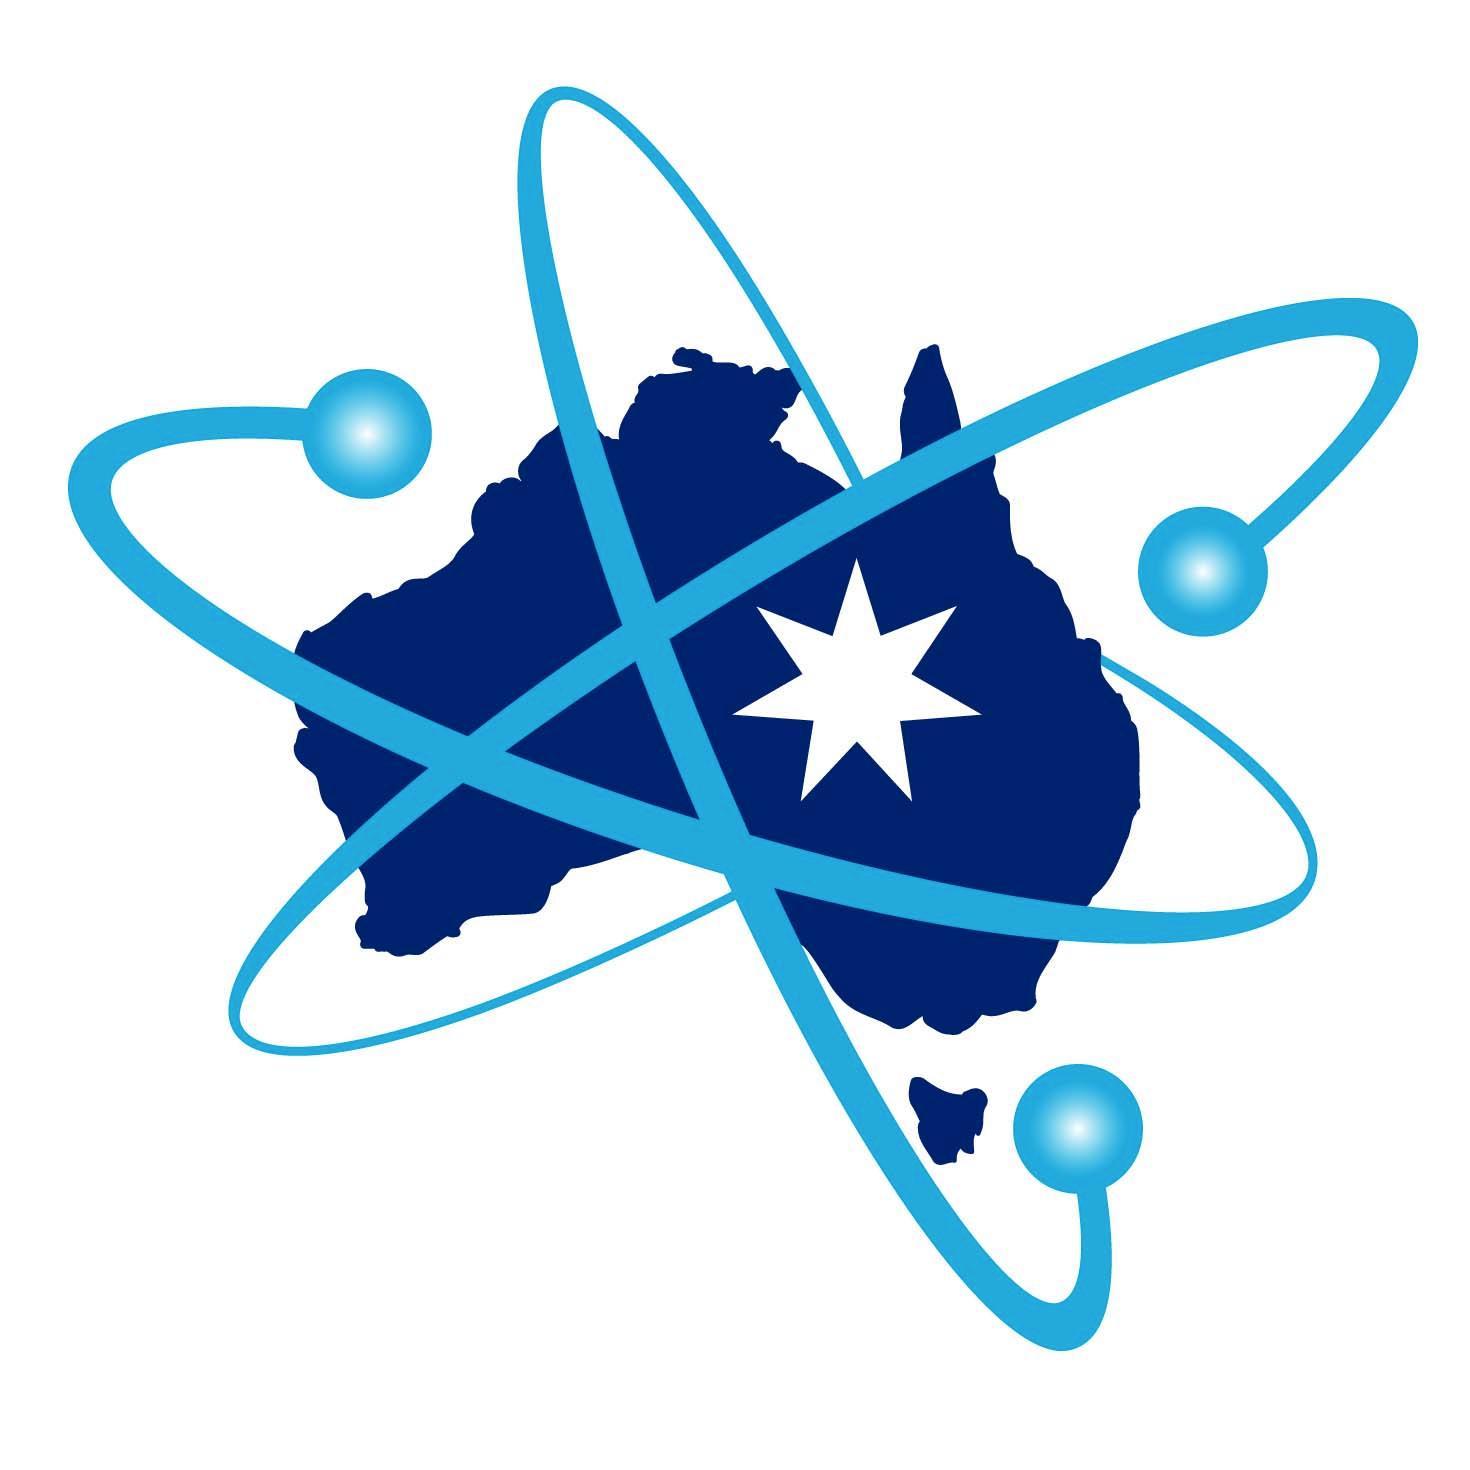 The Australian Nuclear Association Inc (ANA) promotes the use of nuclear science and technology in Australia.